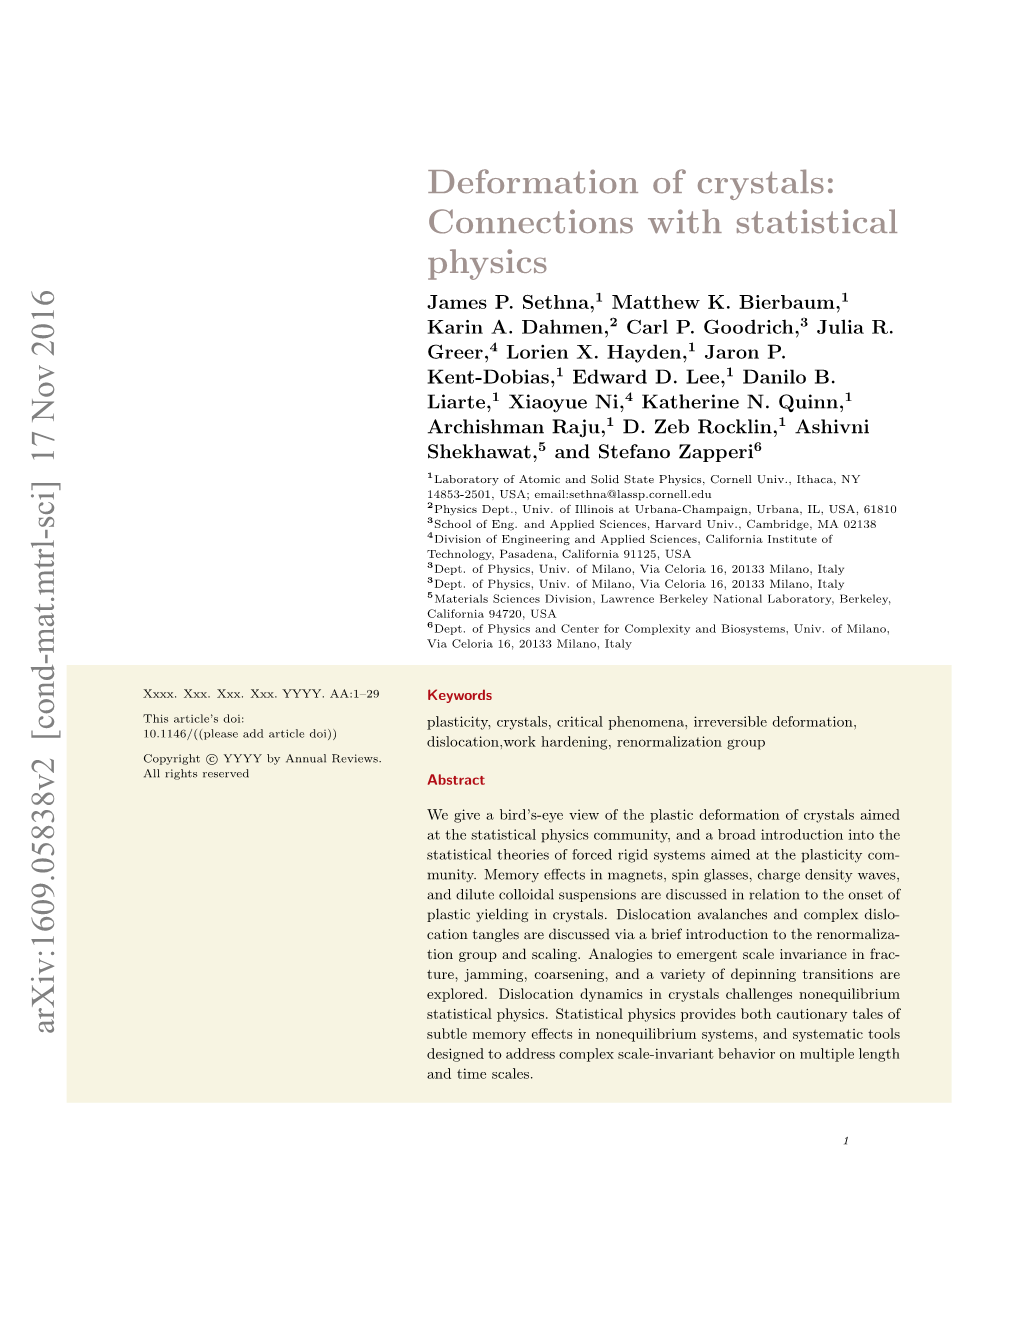 Deformation of Crystals: Connections with Statistical Physics James P